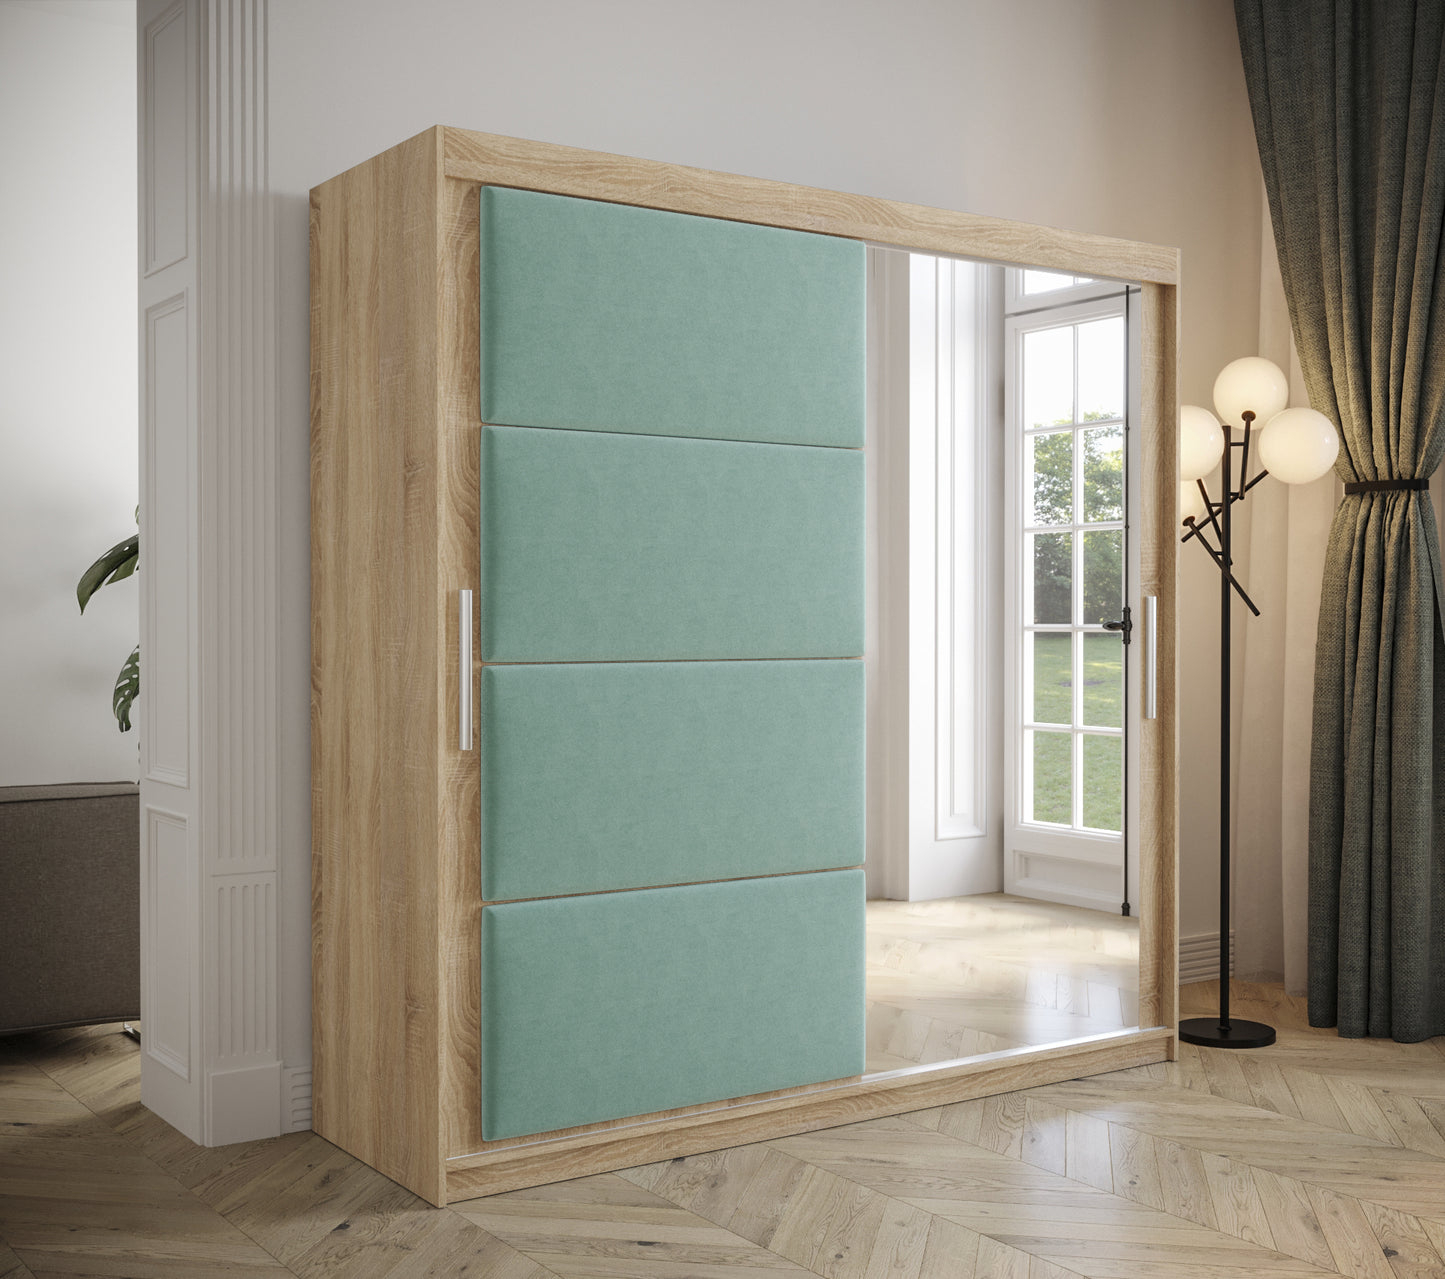 TAPPY - Wardrobe Mirror 2 Colours 7 Colours Upholstered Front Panels Drawers Optional >200cm x 200cm<